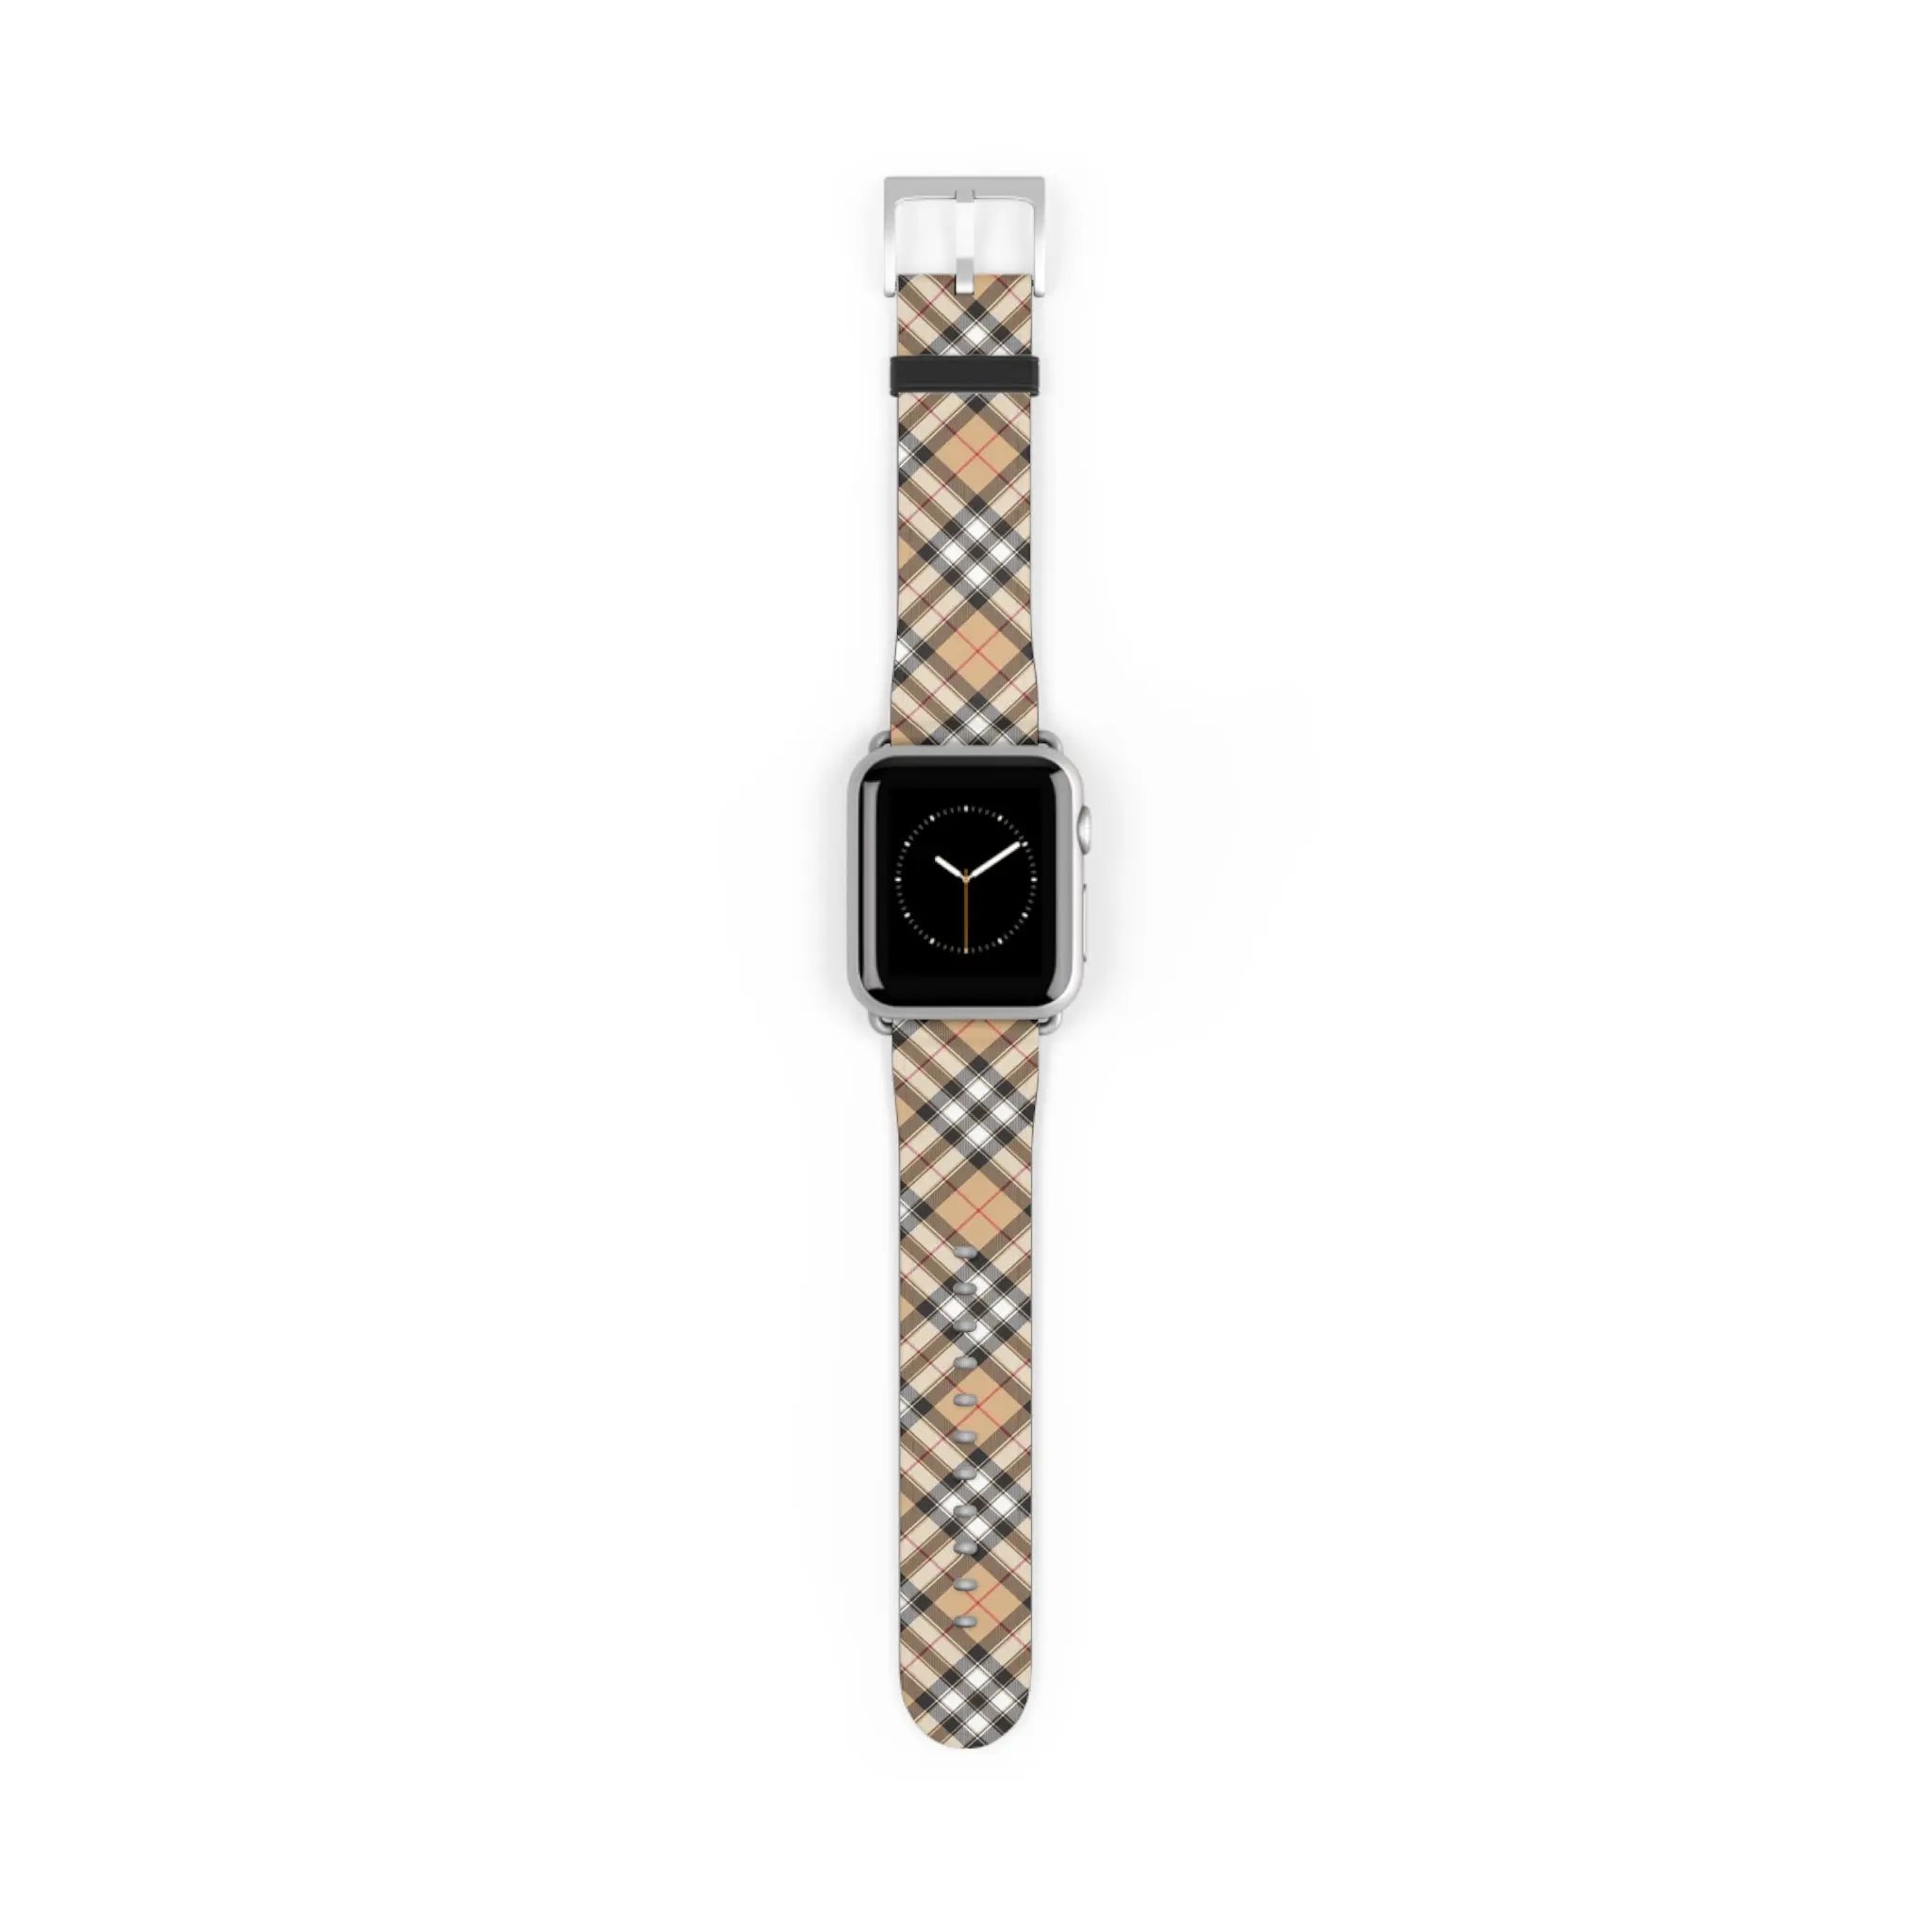  Copy of Casual Wear in Beige Plaid Watch Band for Apple Watch Accessories38-41mmSilverMatte